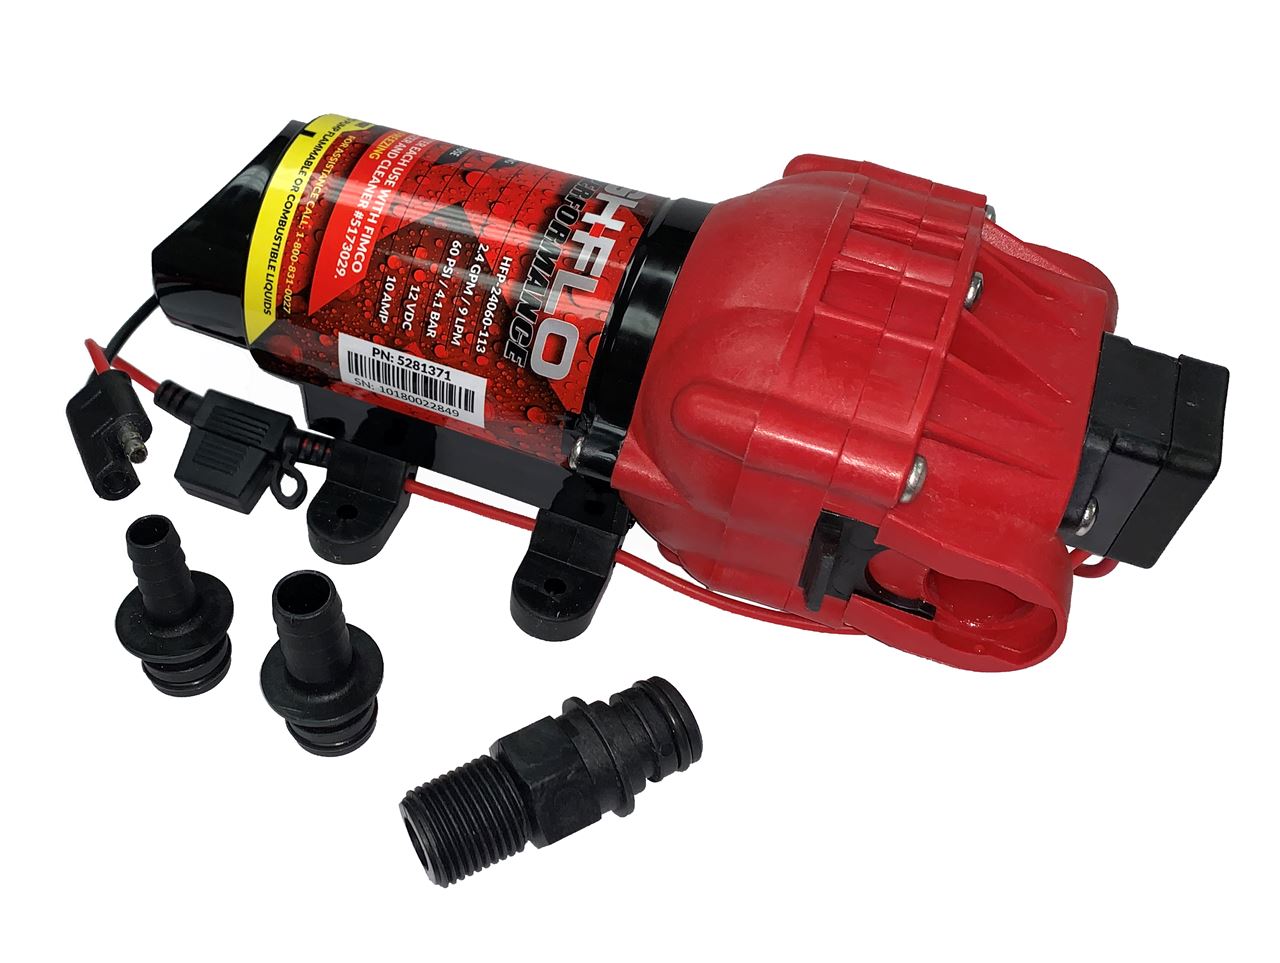 High-Flo High Performance Pump 4.5 GPM 60 PSI for sale online 5151088 